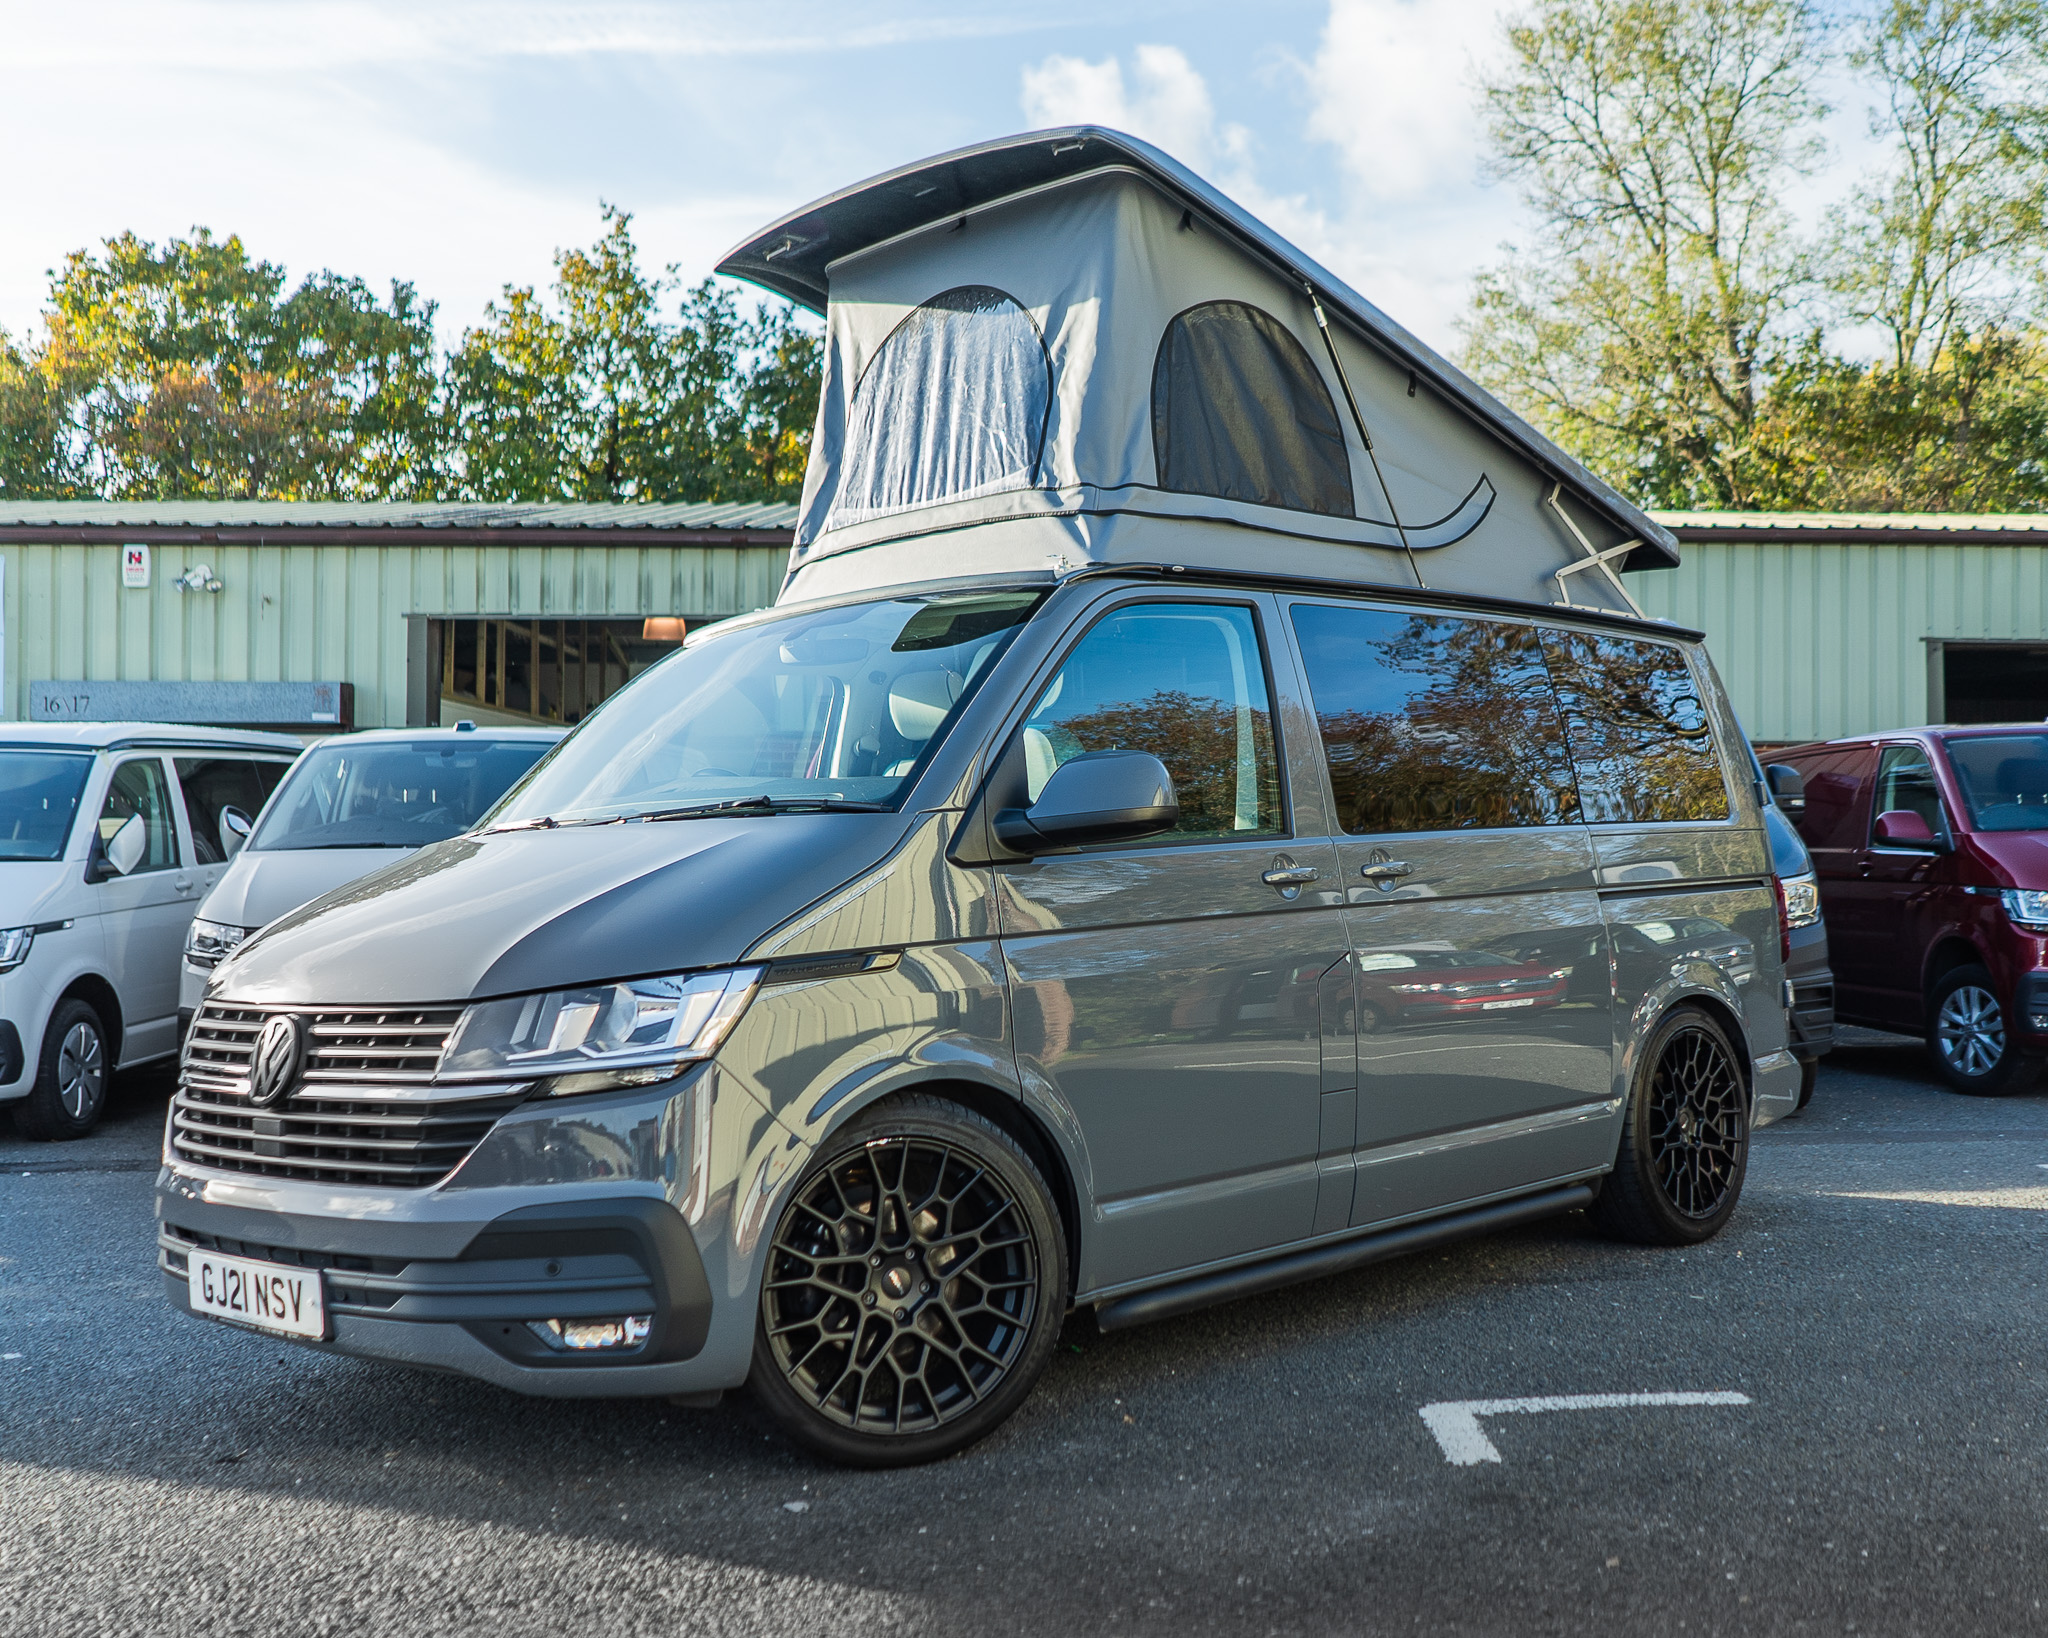 VW Transporter 150ps DSG - High Spec! - Out and About Campervans